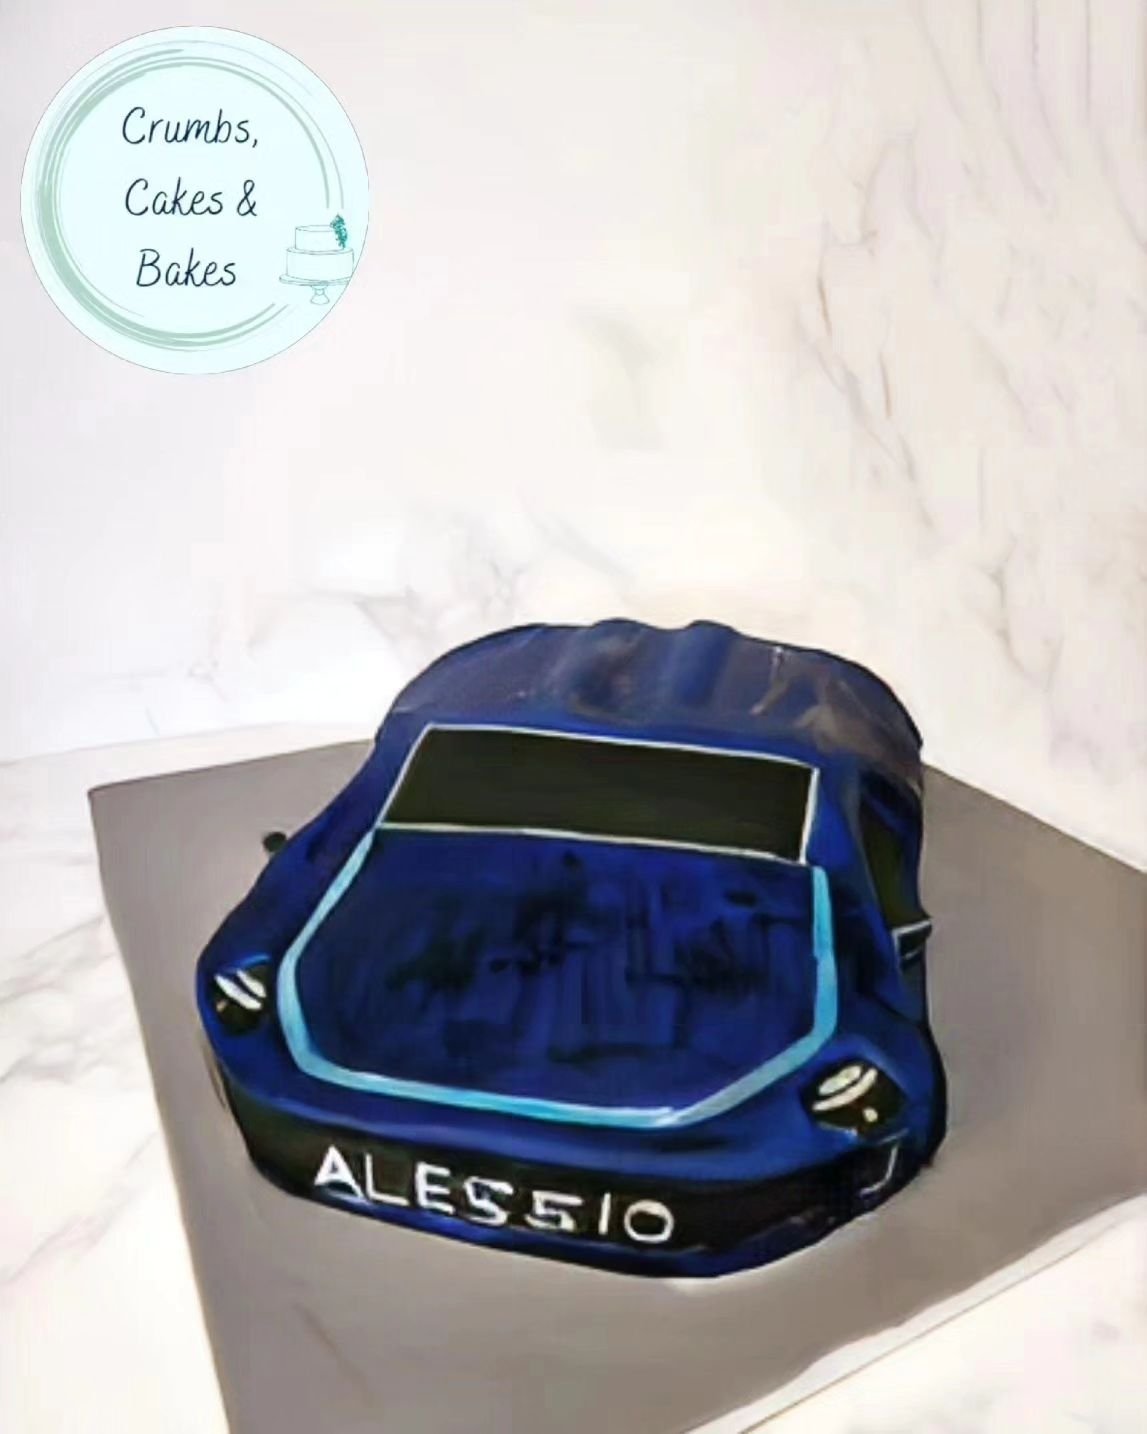 F A S T  L I K E  A  L A M B O

My son is currently obsessed with race cars, so of course that was the theme for his 6th birthday this year.

I modelled his cake on the @lamborghini Aventador and safe to say he was so happy with it! 

His fave cake i